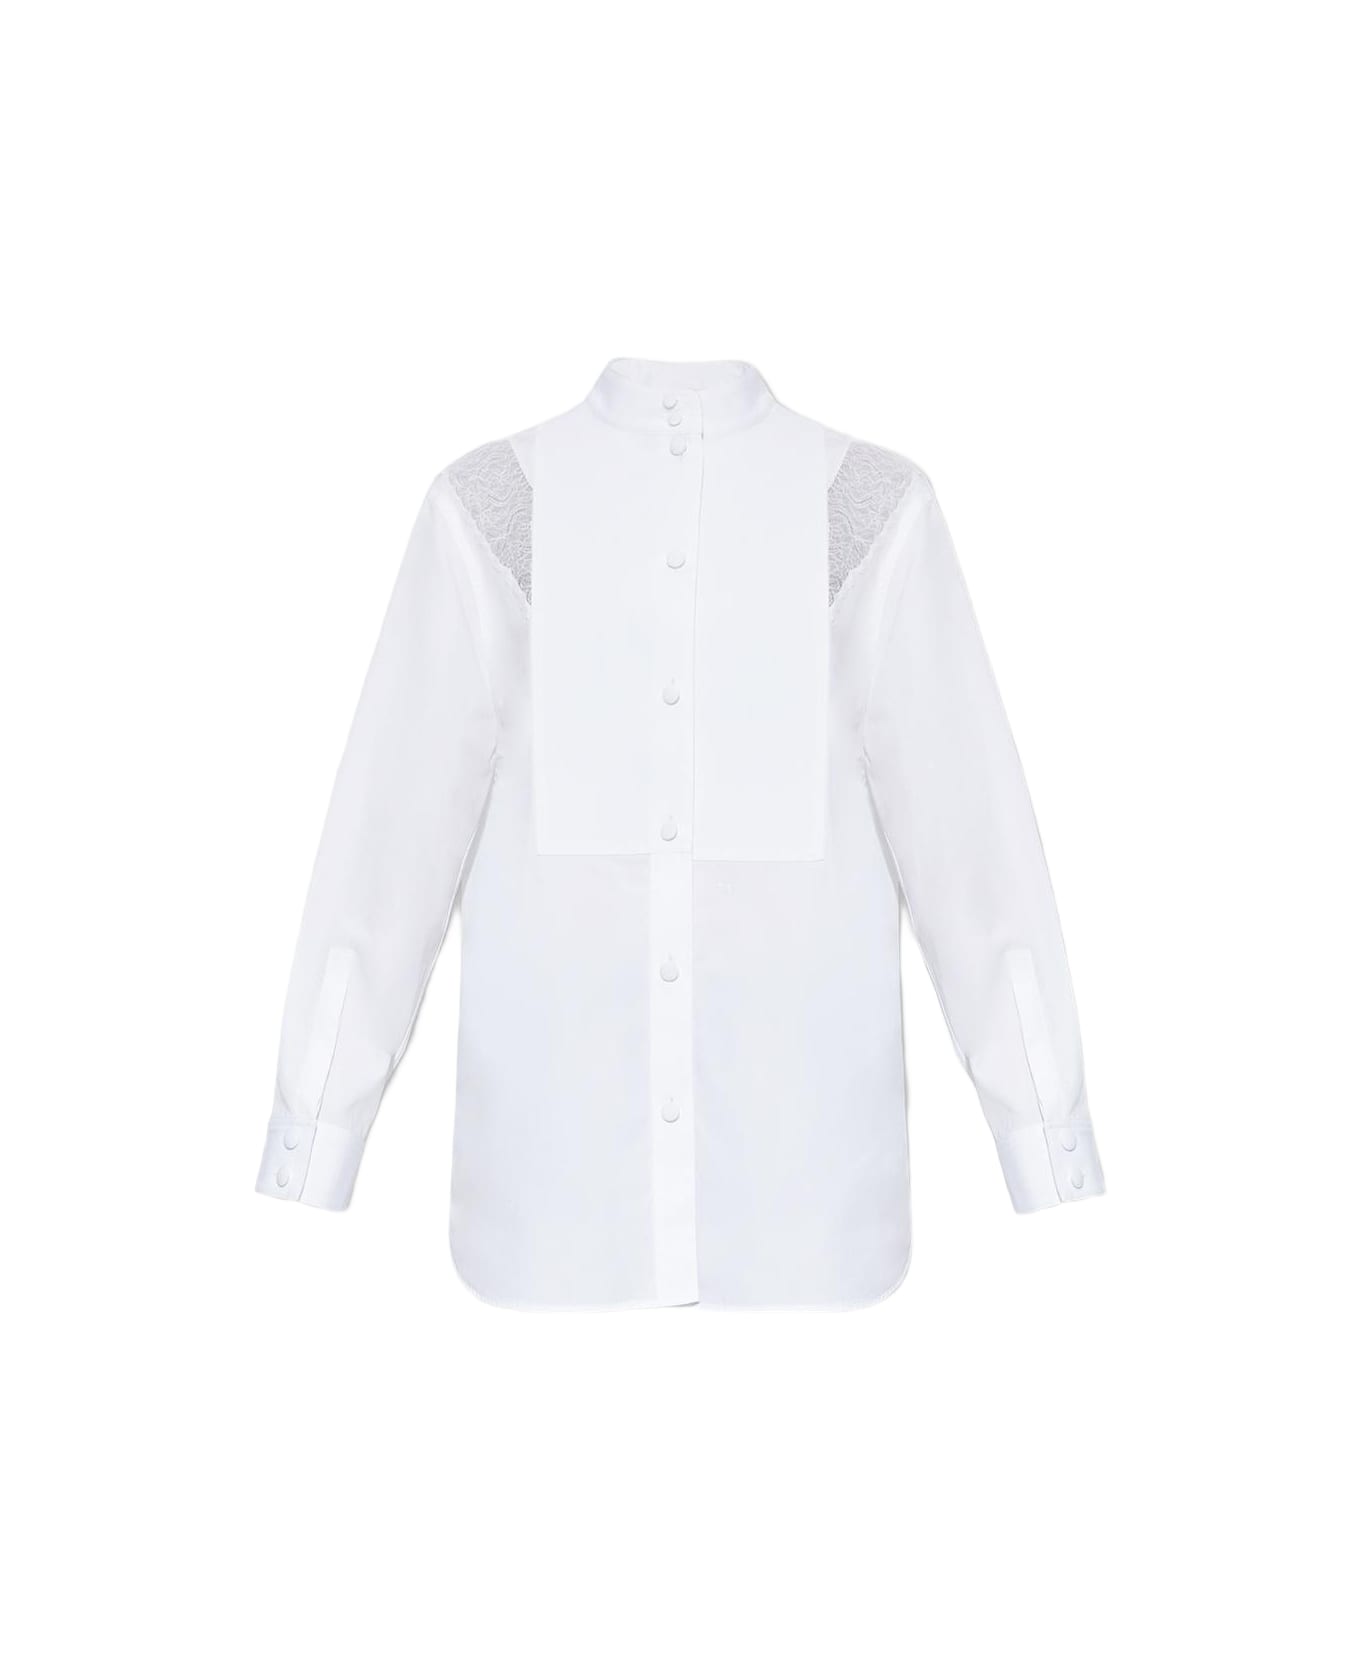 Burberry Shirt With Lace Inserts - White